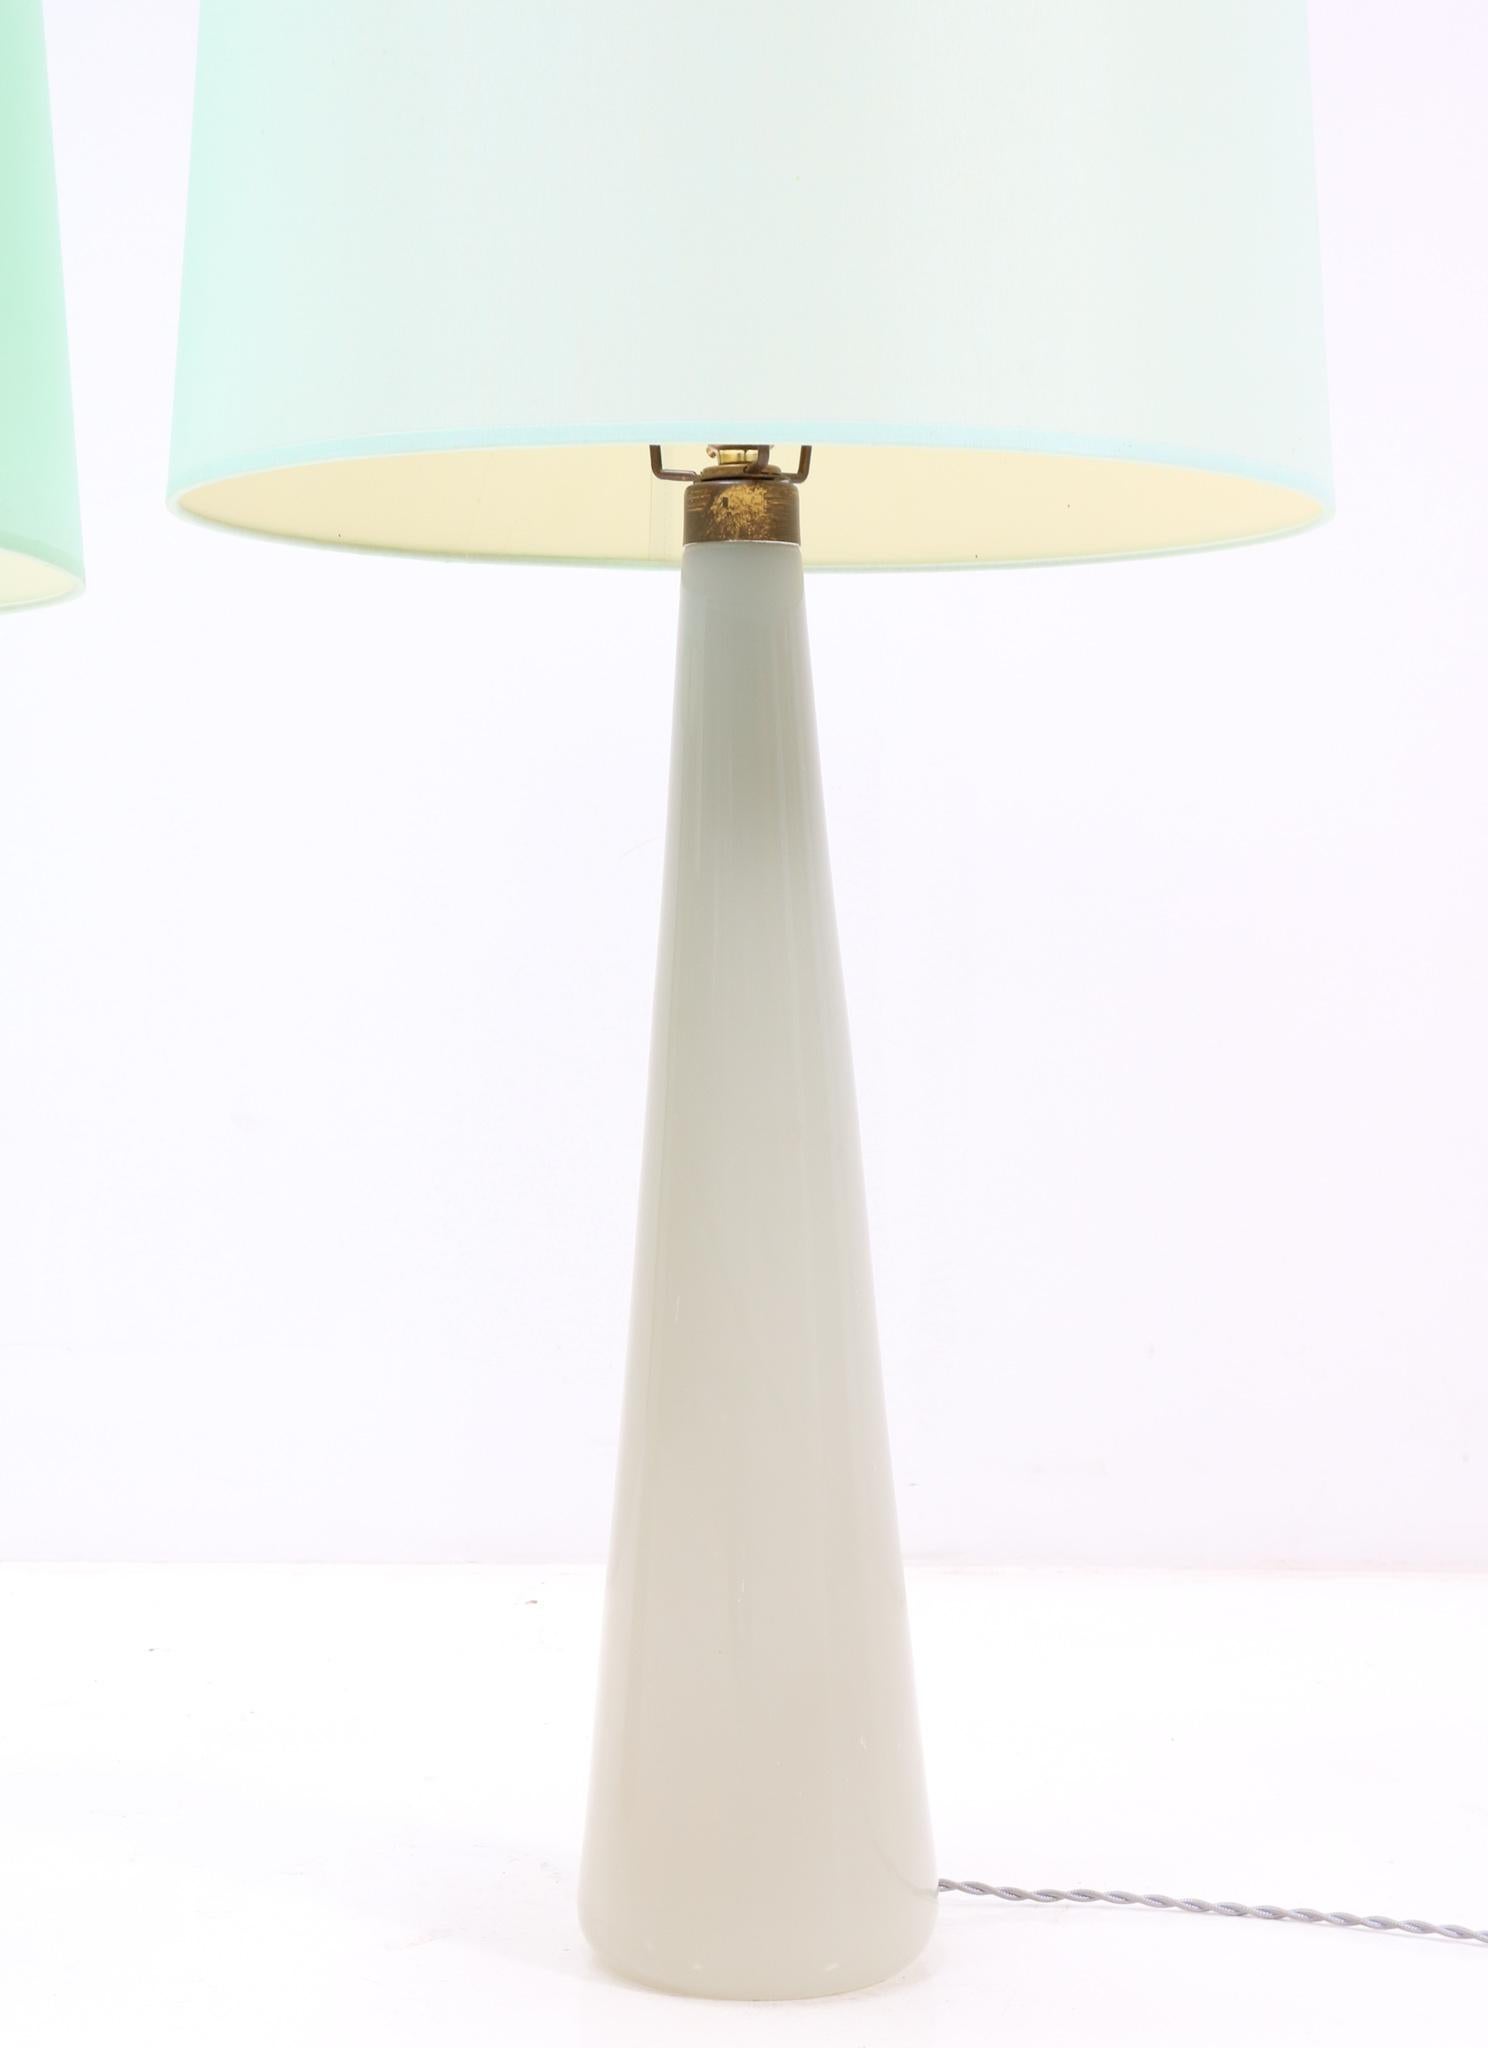 Two Mid-Century Modern Opaline Table Lamps by Archimede Seguso Murano, 1970s For Sale 7